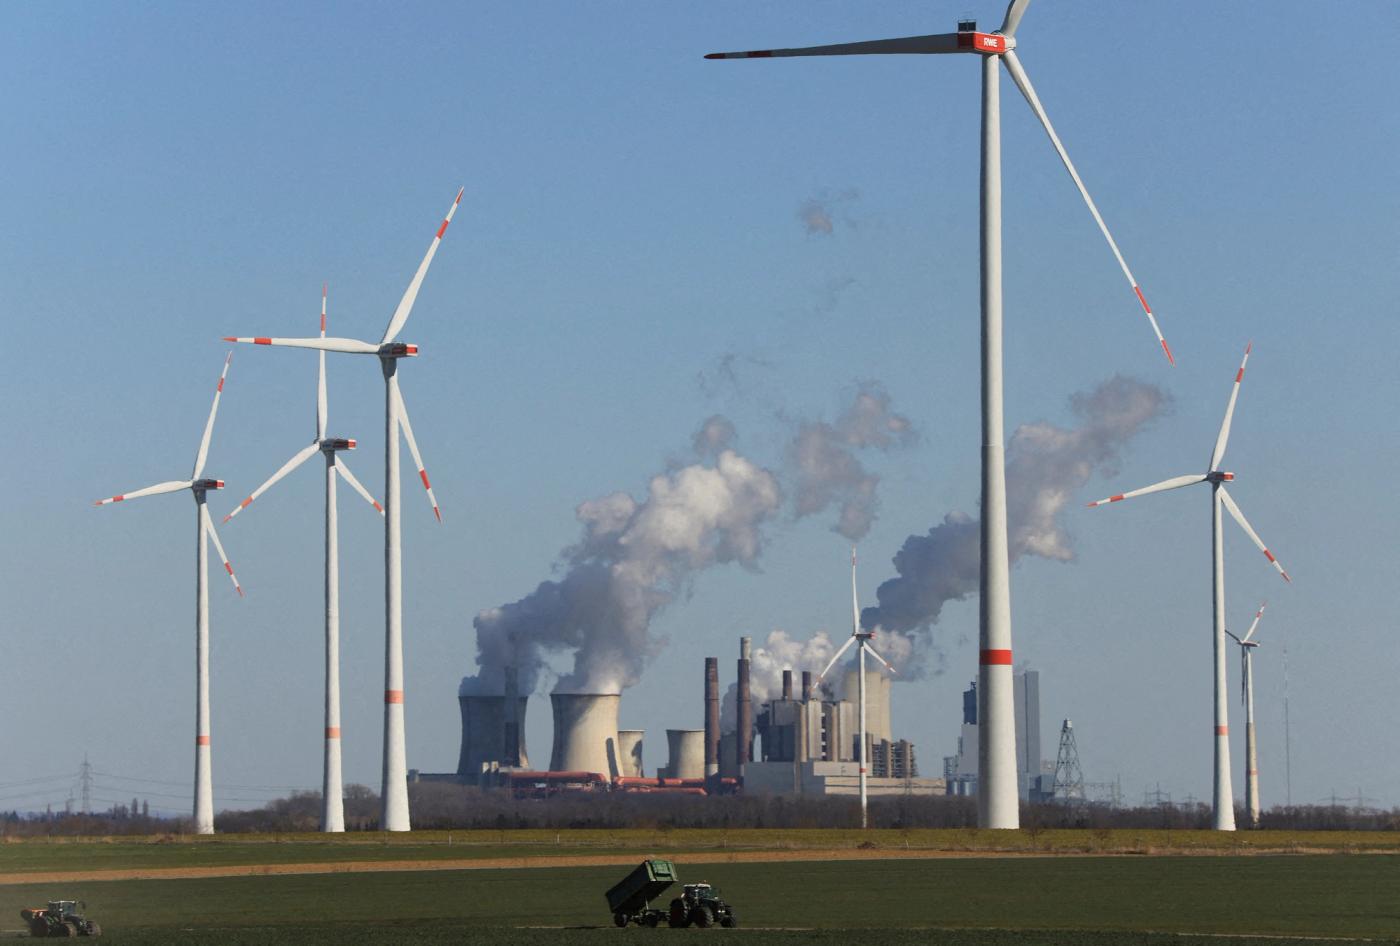  Wind power stations of German utility RWE, one of Europe's biggest electricity companies are pictured in front of RWE's brown coal fired power plants of Neurath, Germany, March 18, 2022. REUTERS/Wolfgang Rattay//File Photo